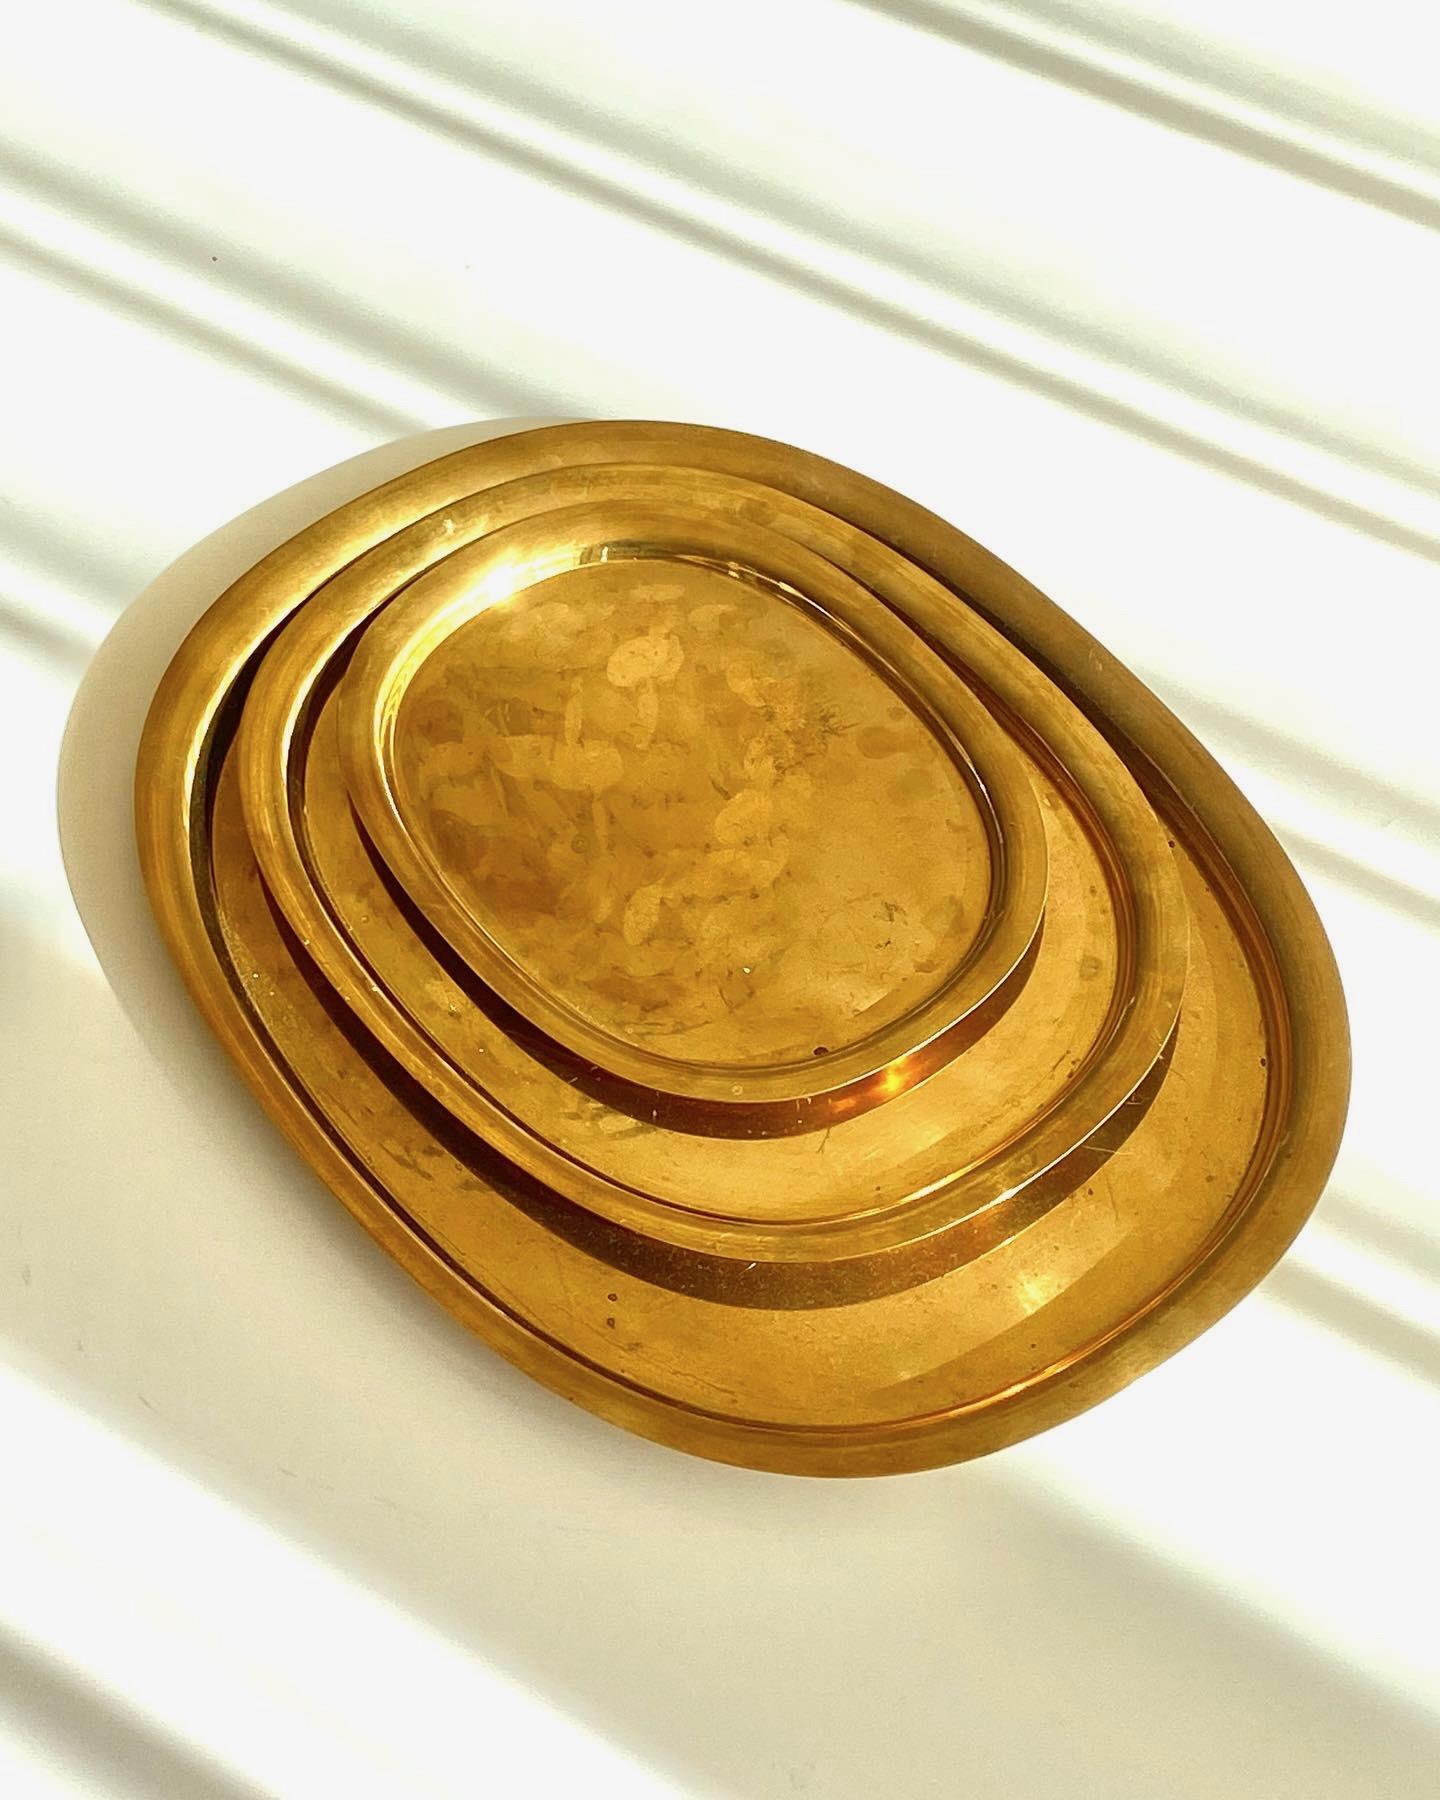 Super RAR set of three elliptical solid brass trays. This are the 3 sizes Georg Jensen produced in 1960's. The small one is signed. Very nice set and the large one is difficult to find. Here the chance to get all 3 sizes together. Price for the Set,